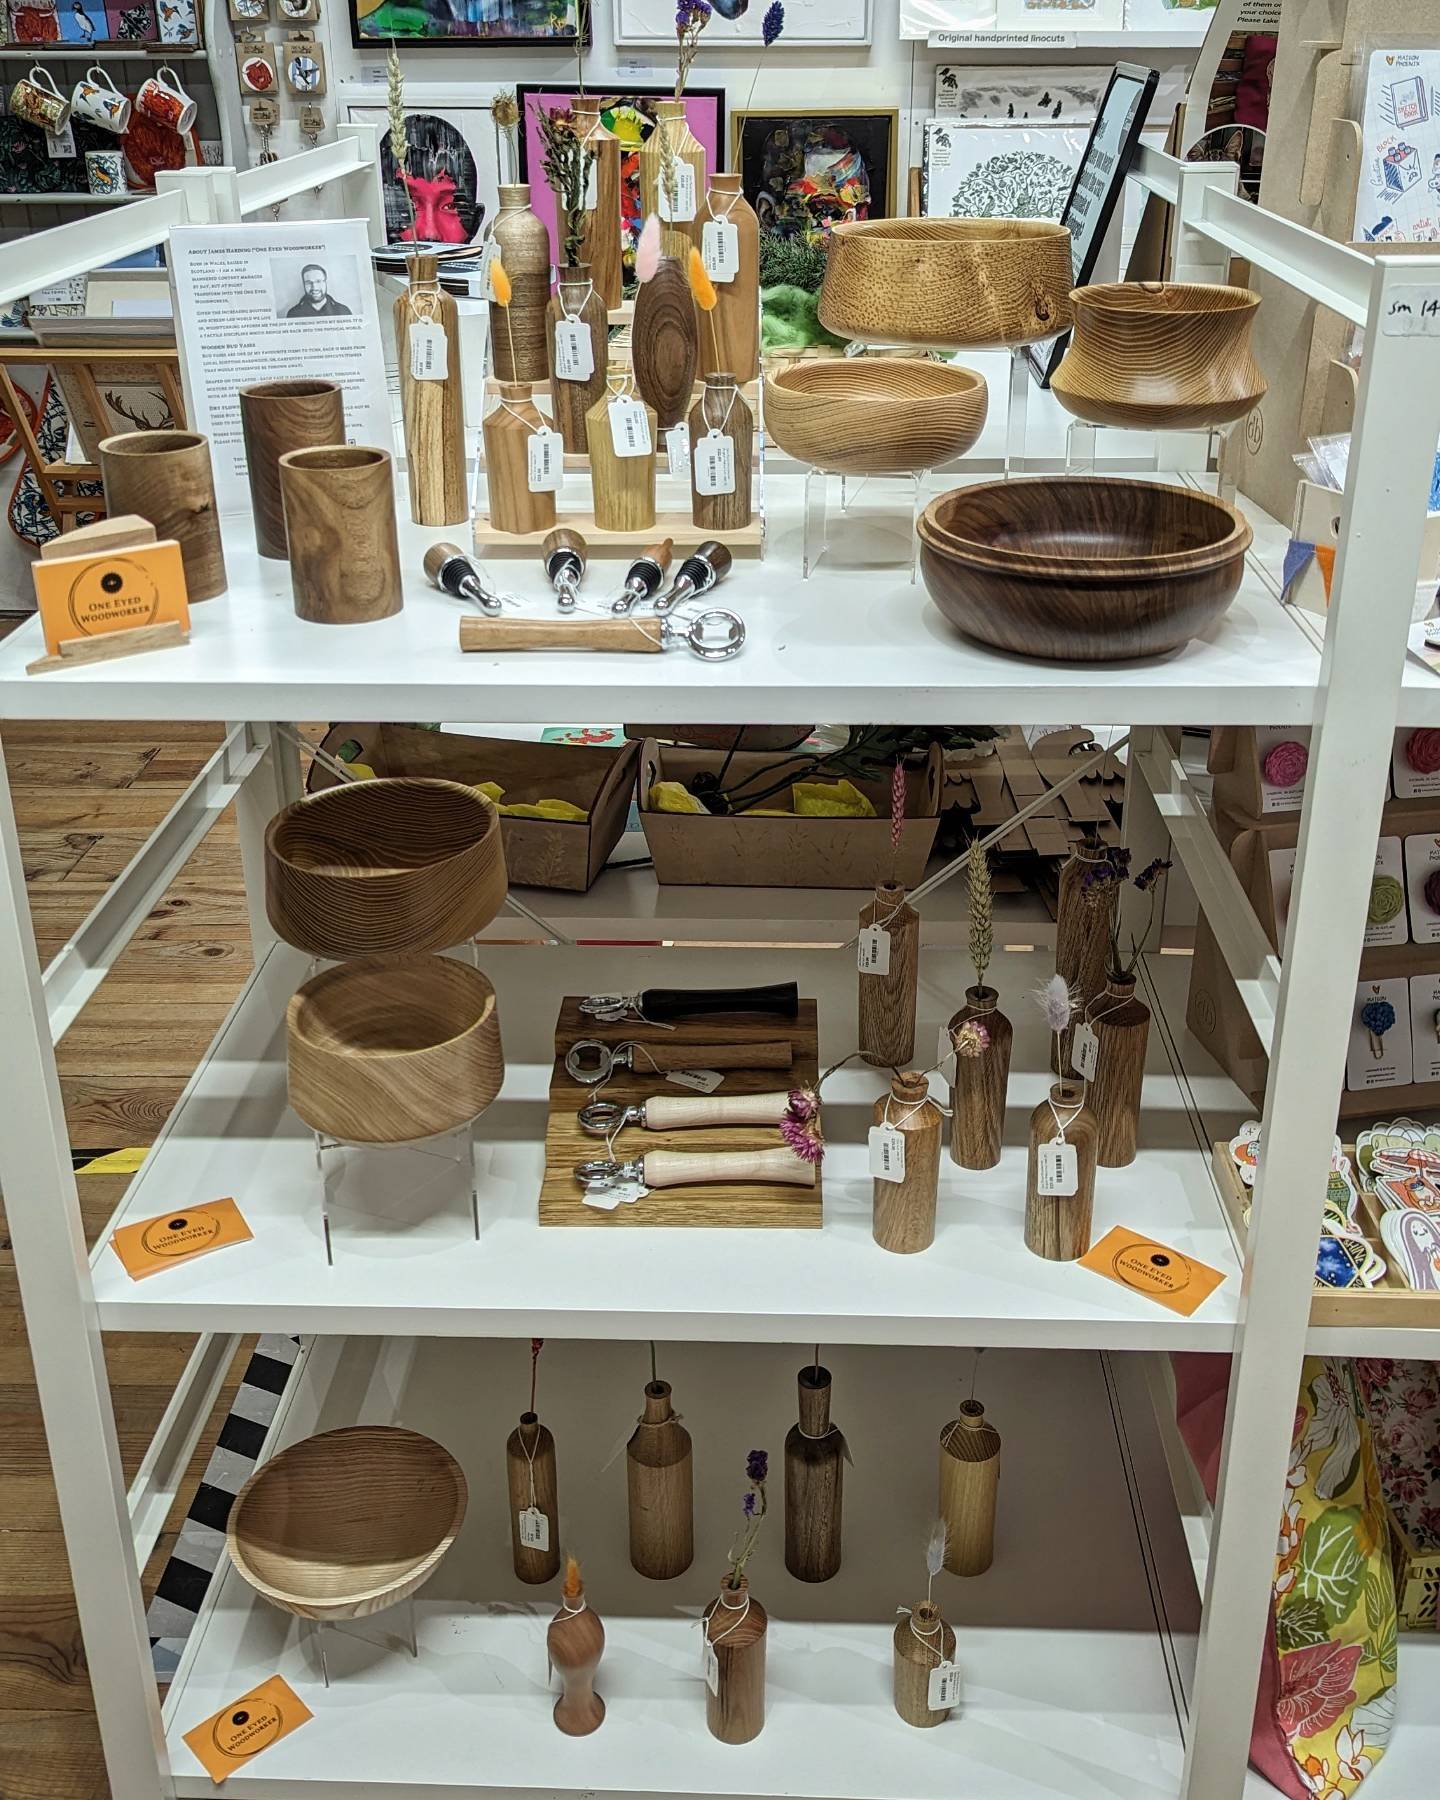 I upgraded my rent at @scottishdesignexchange in Edinburgh today. From 1 shelf to 3 - almost exactly 2 years from when I first started selling through them. 

It's also been great to expand my items to now sell my bowls and pots. Thanks to the people